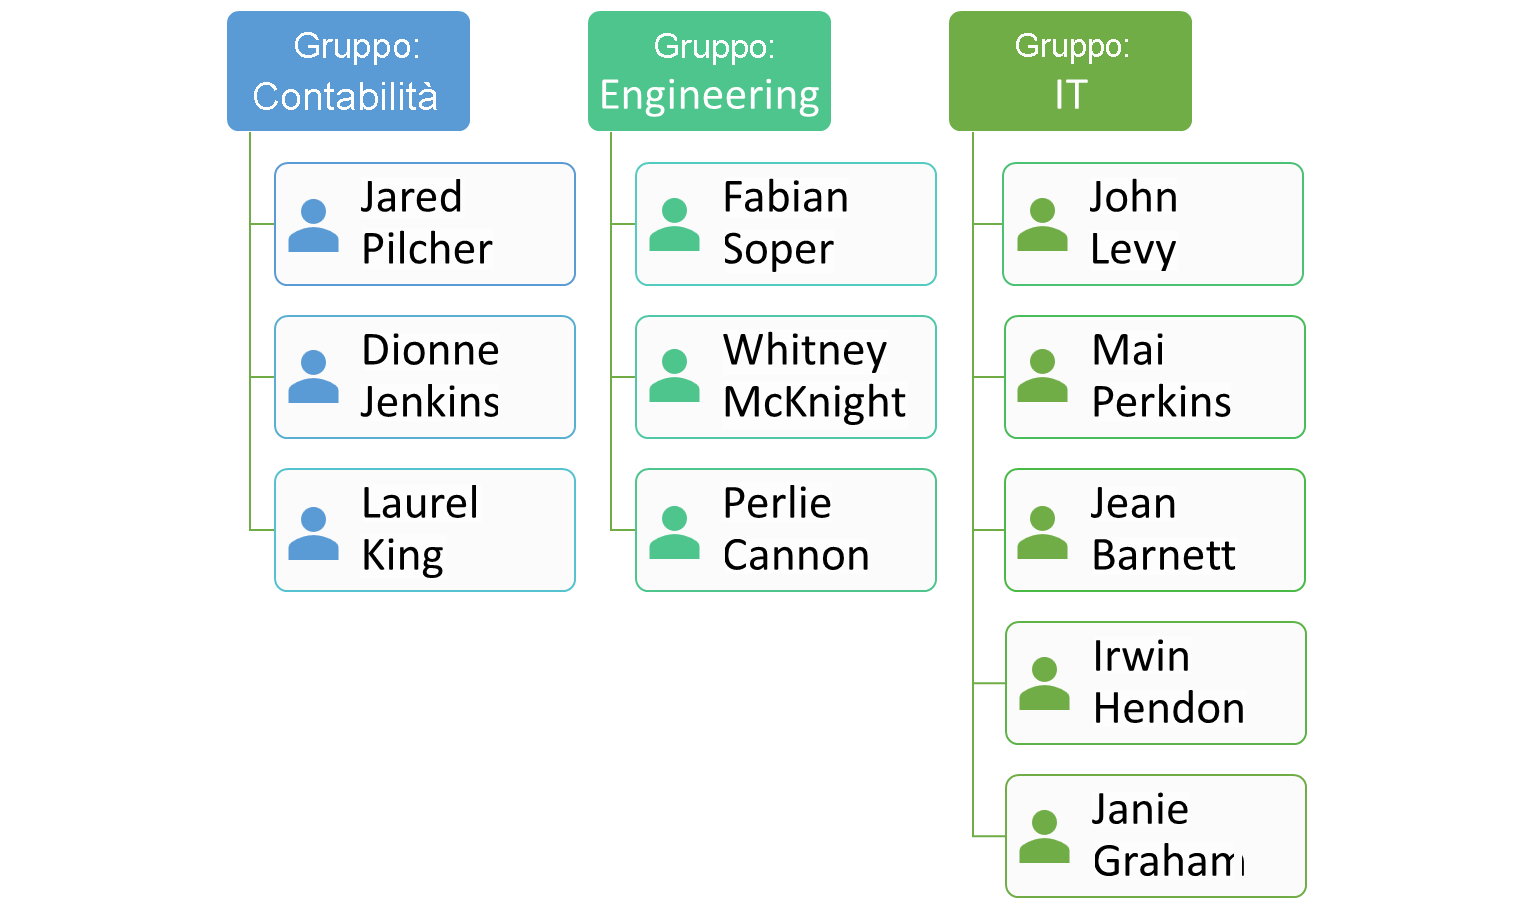 Figure 3.3: Users organized into departmental groups.